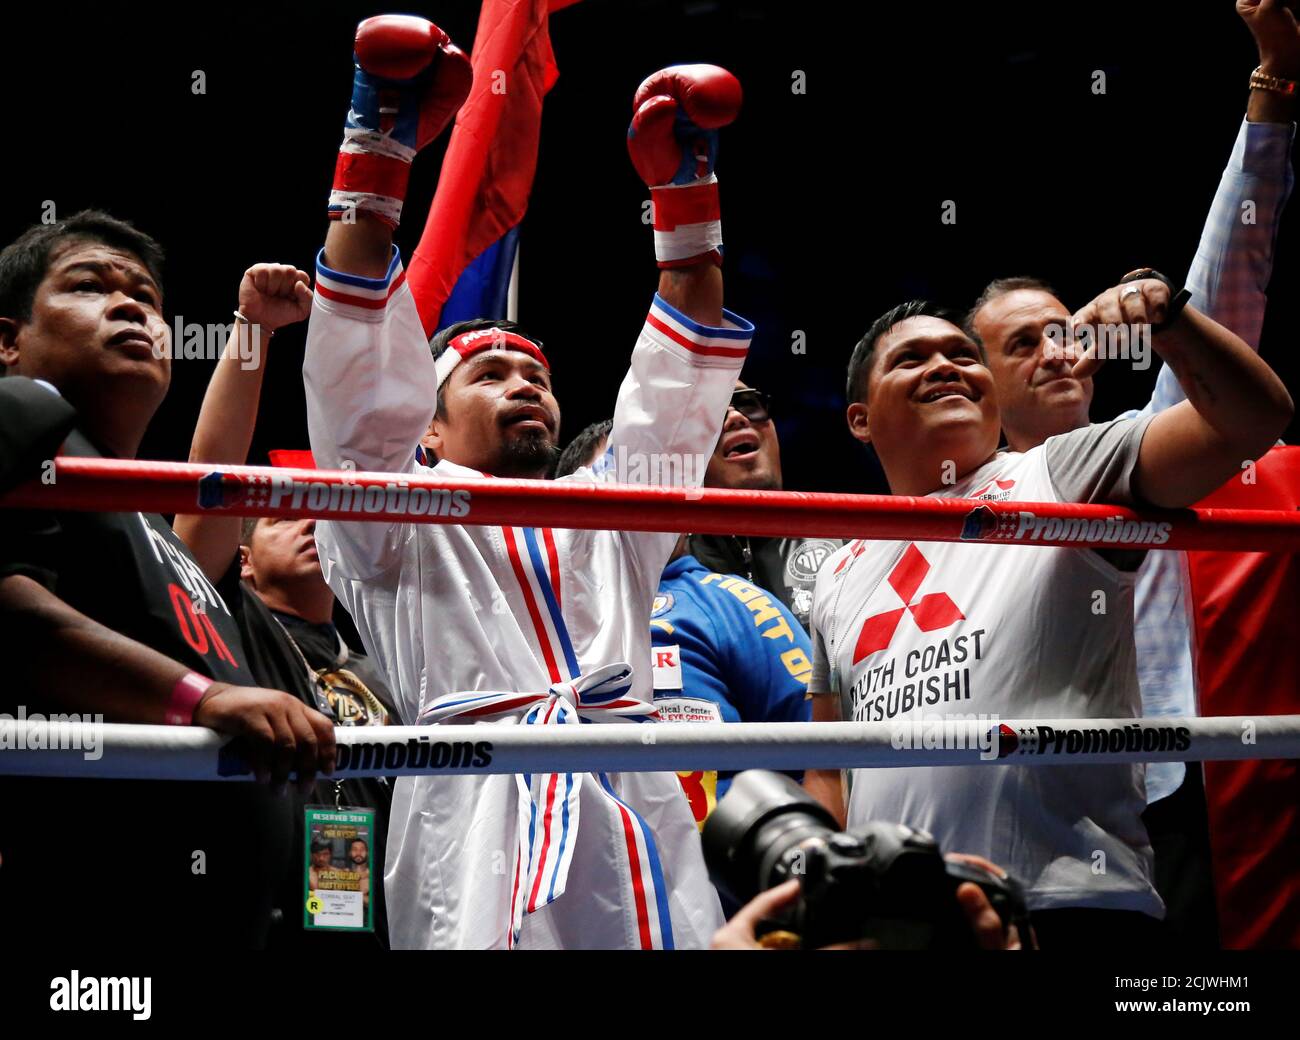 Boxing Wba Welterweight Title Fight Manny Pacquiao V Lucas Matthysse Axiata Arena Kuala Lumpur Malaysia July 15 2018 Manny Pacquiao Enters The Ring Reuters Lai Seng Sin Stock Photo Alamy